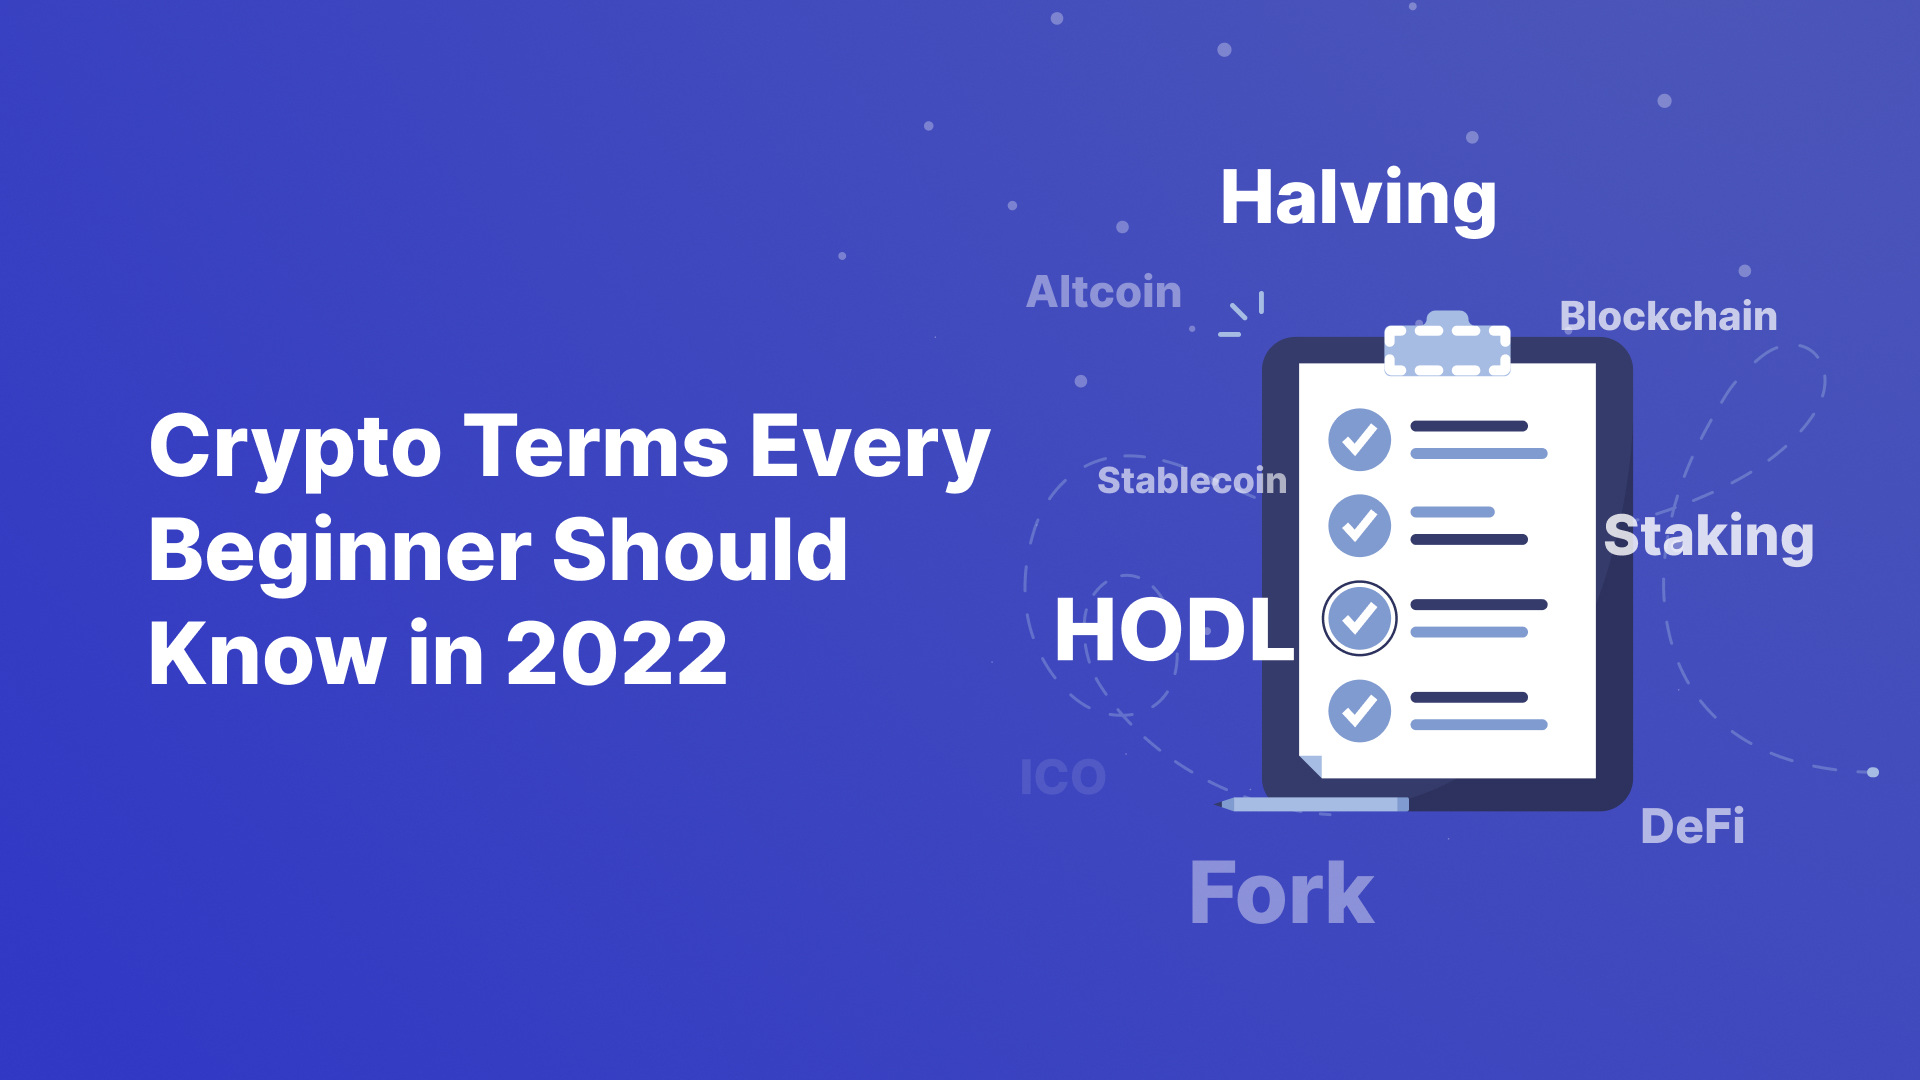 Crypto Terms Every Beginner Should Know in 2022